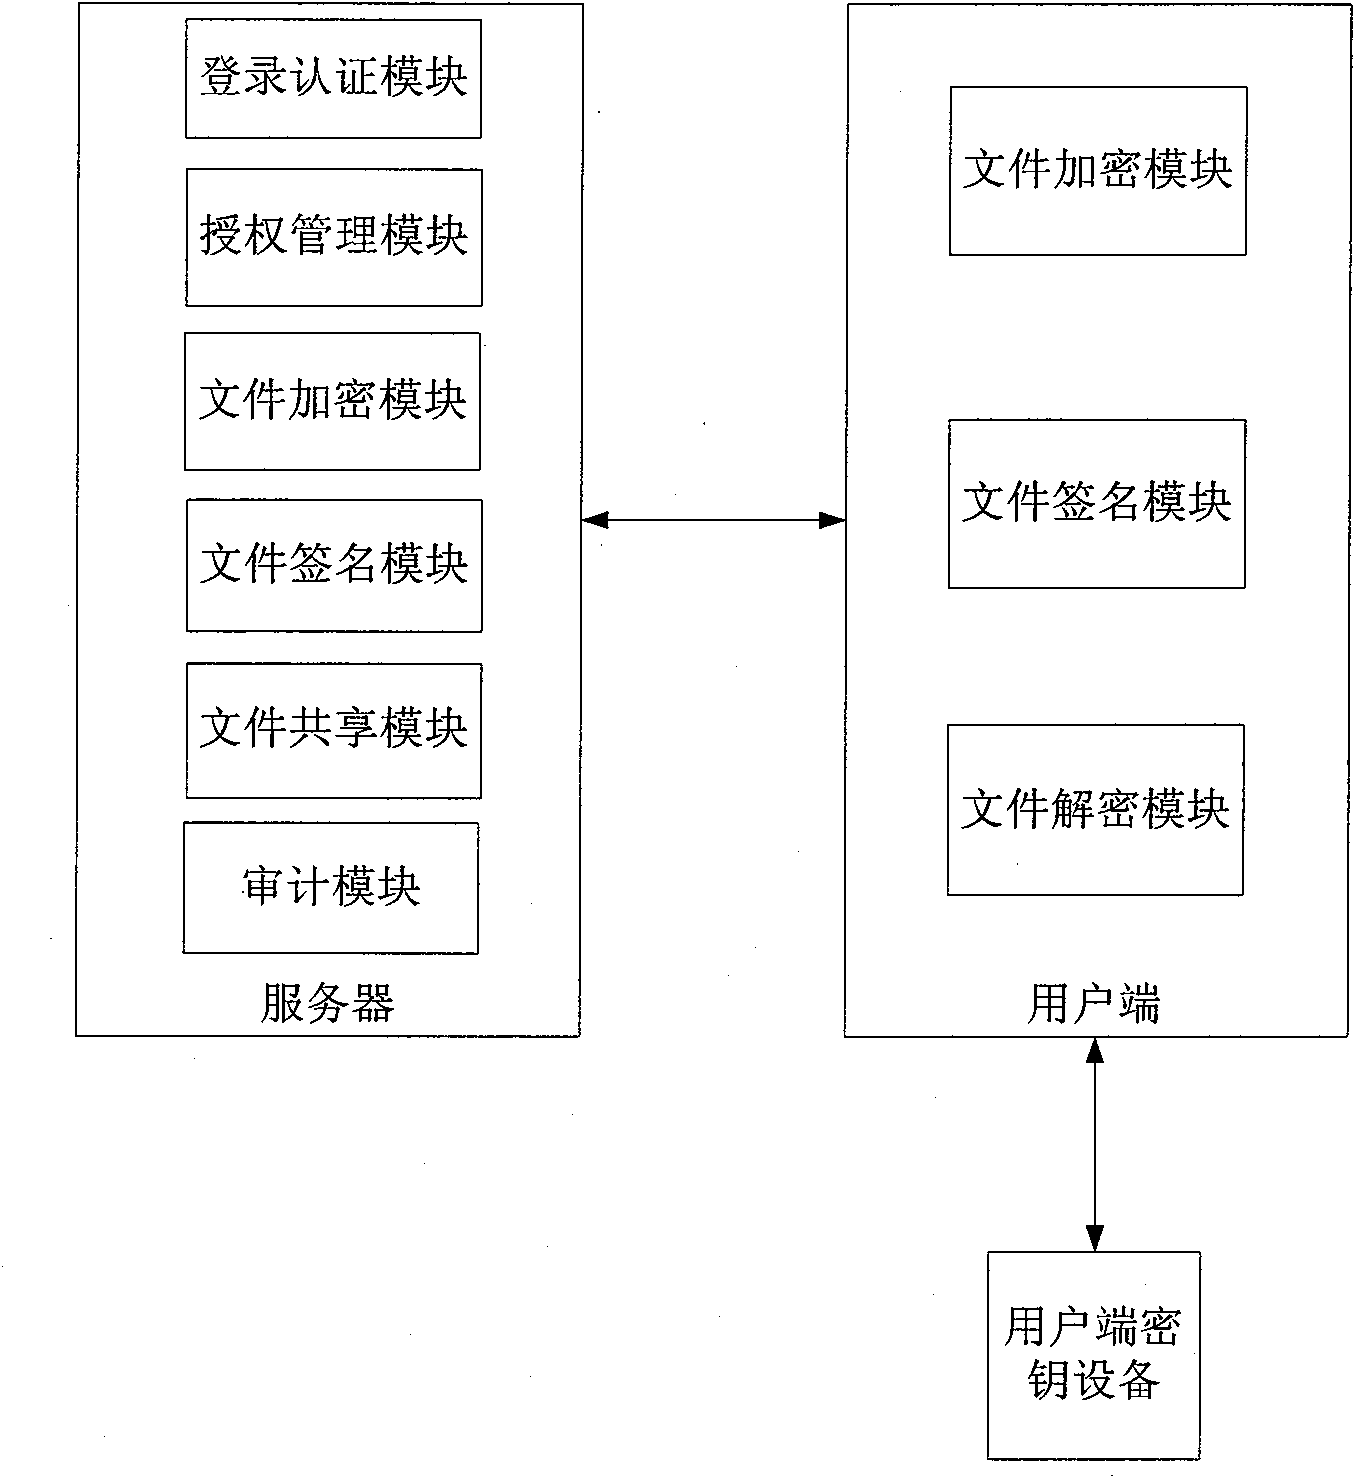 Electronic document safe sharing system and method thereof